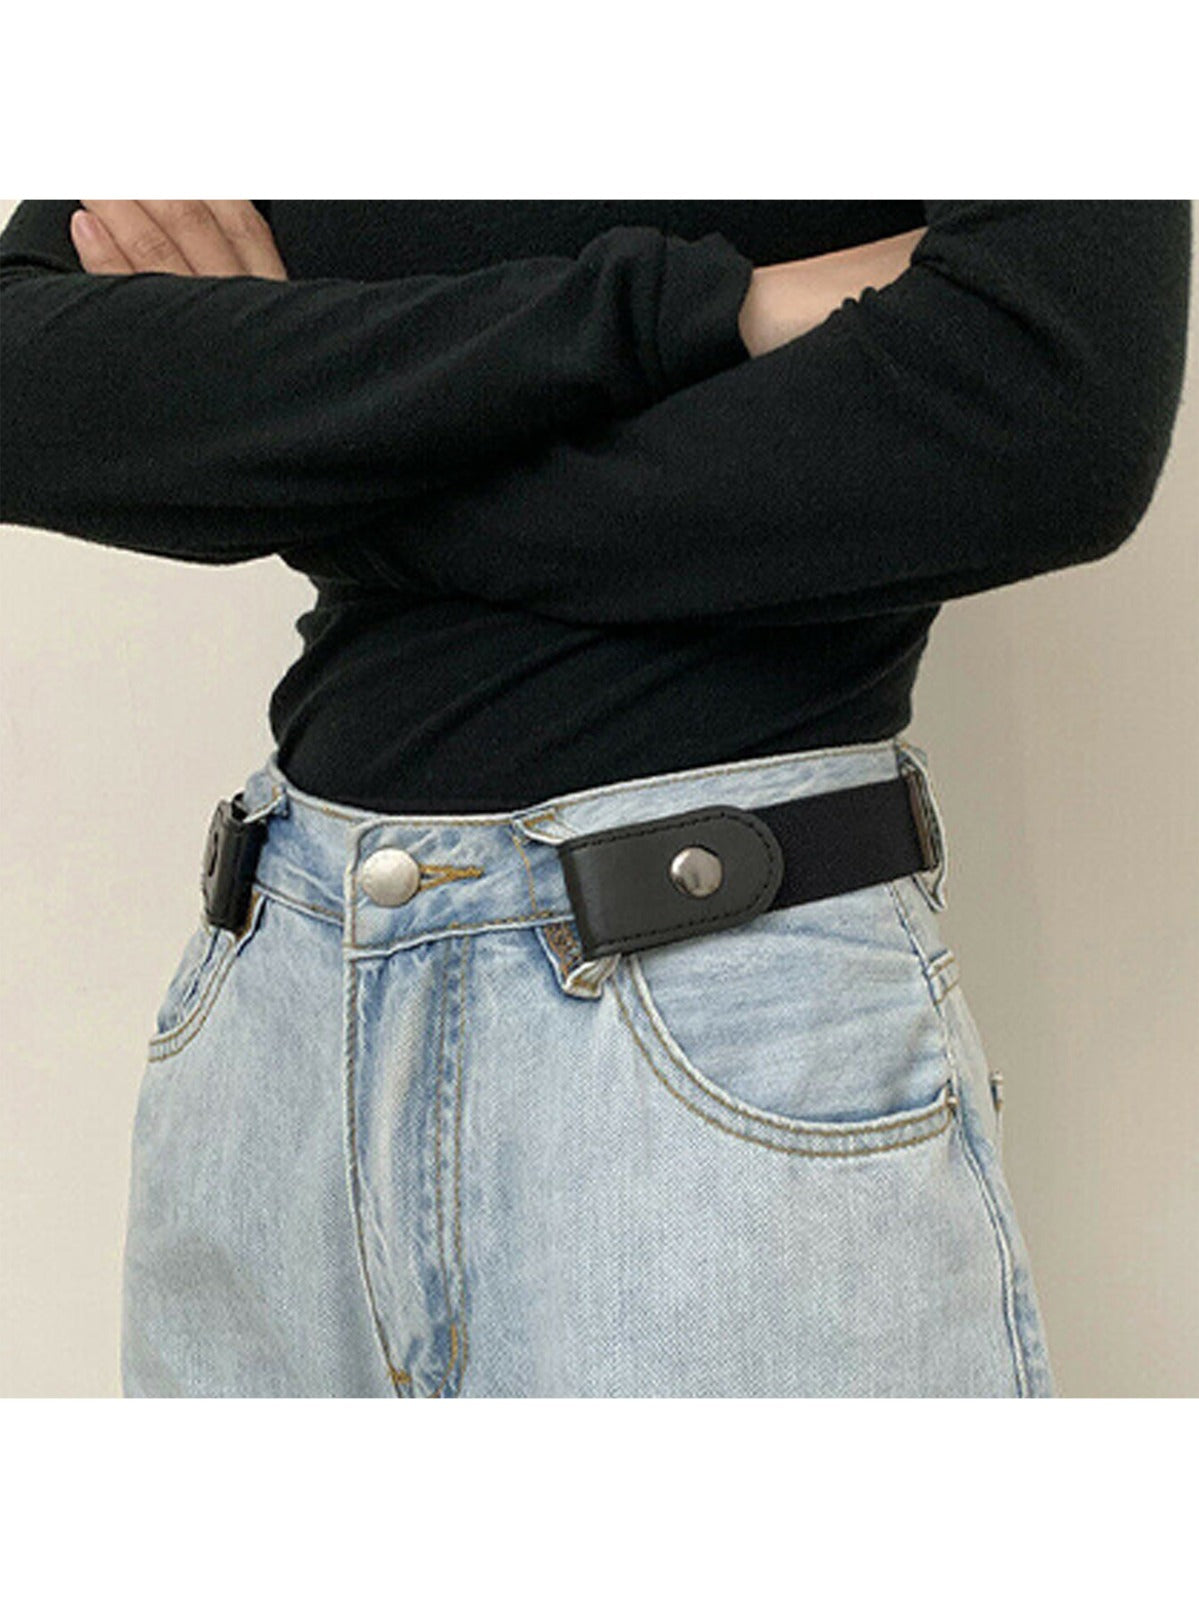 Unisex Buckle-Free Stretch Belt, Adjustable Elasticated No Buckle Belt,  Invisible Belt For Jeans, Trousers, Shorts, Western Outfits